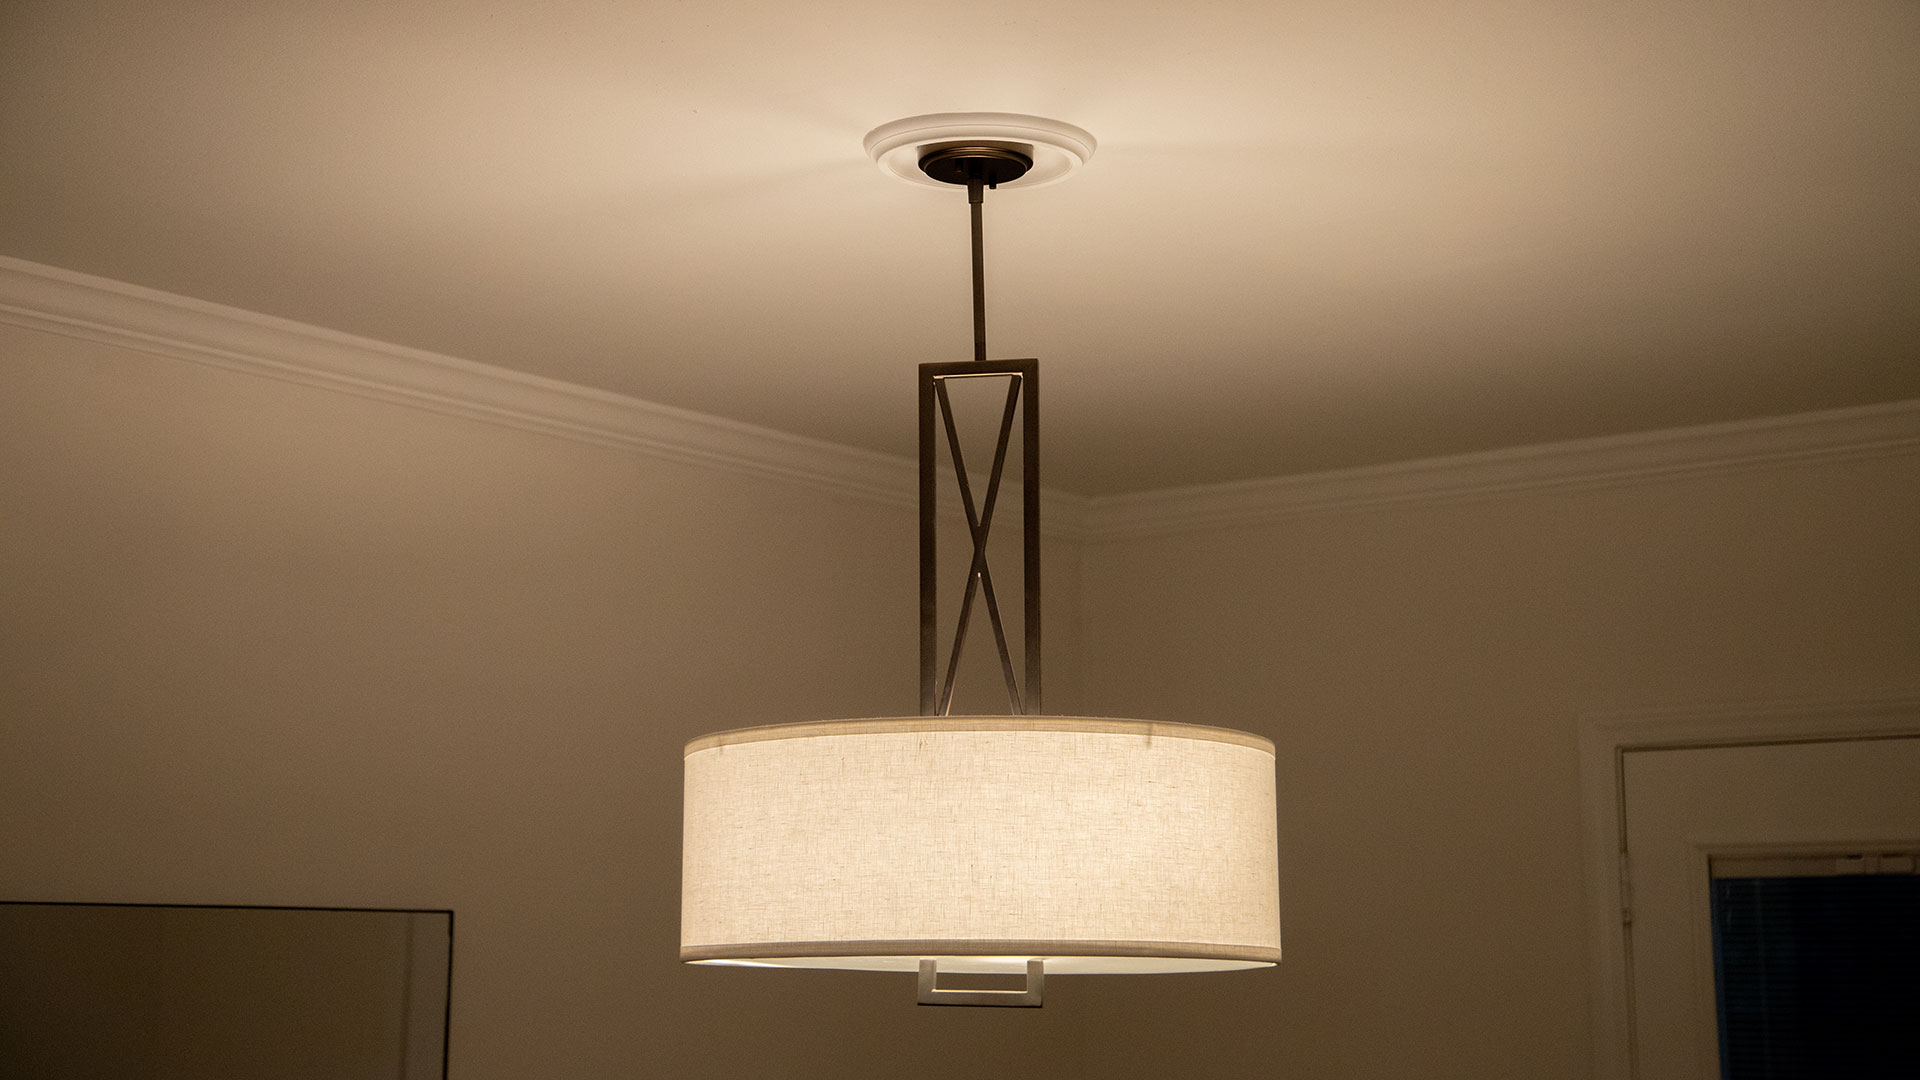 How To Install A Ceiling Medallion, Install Light Fixture Medallion